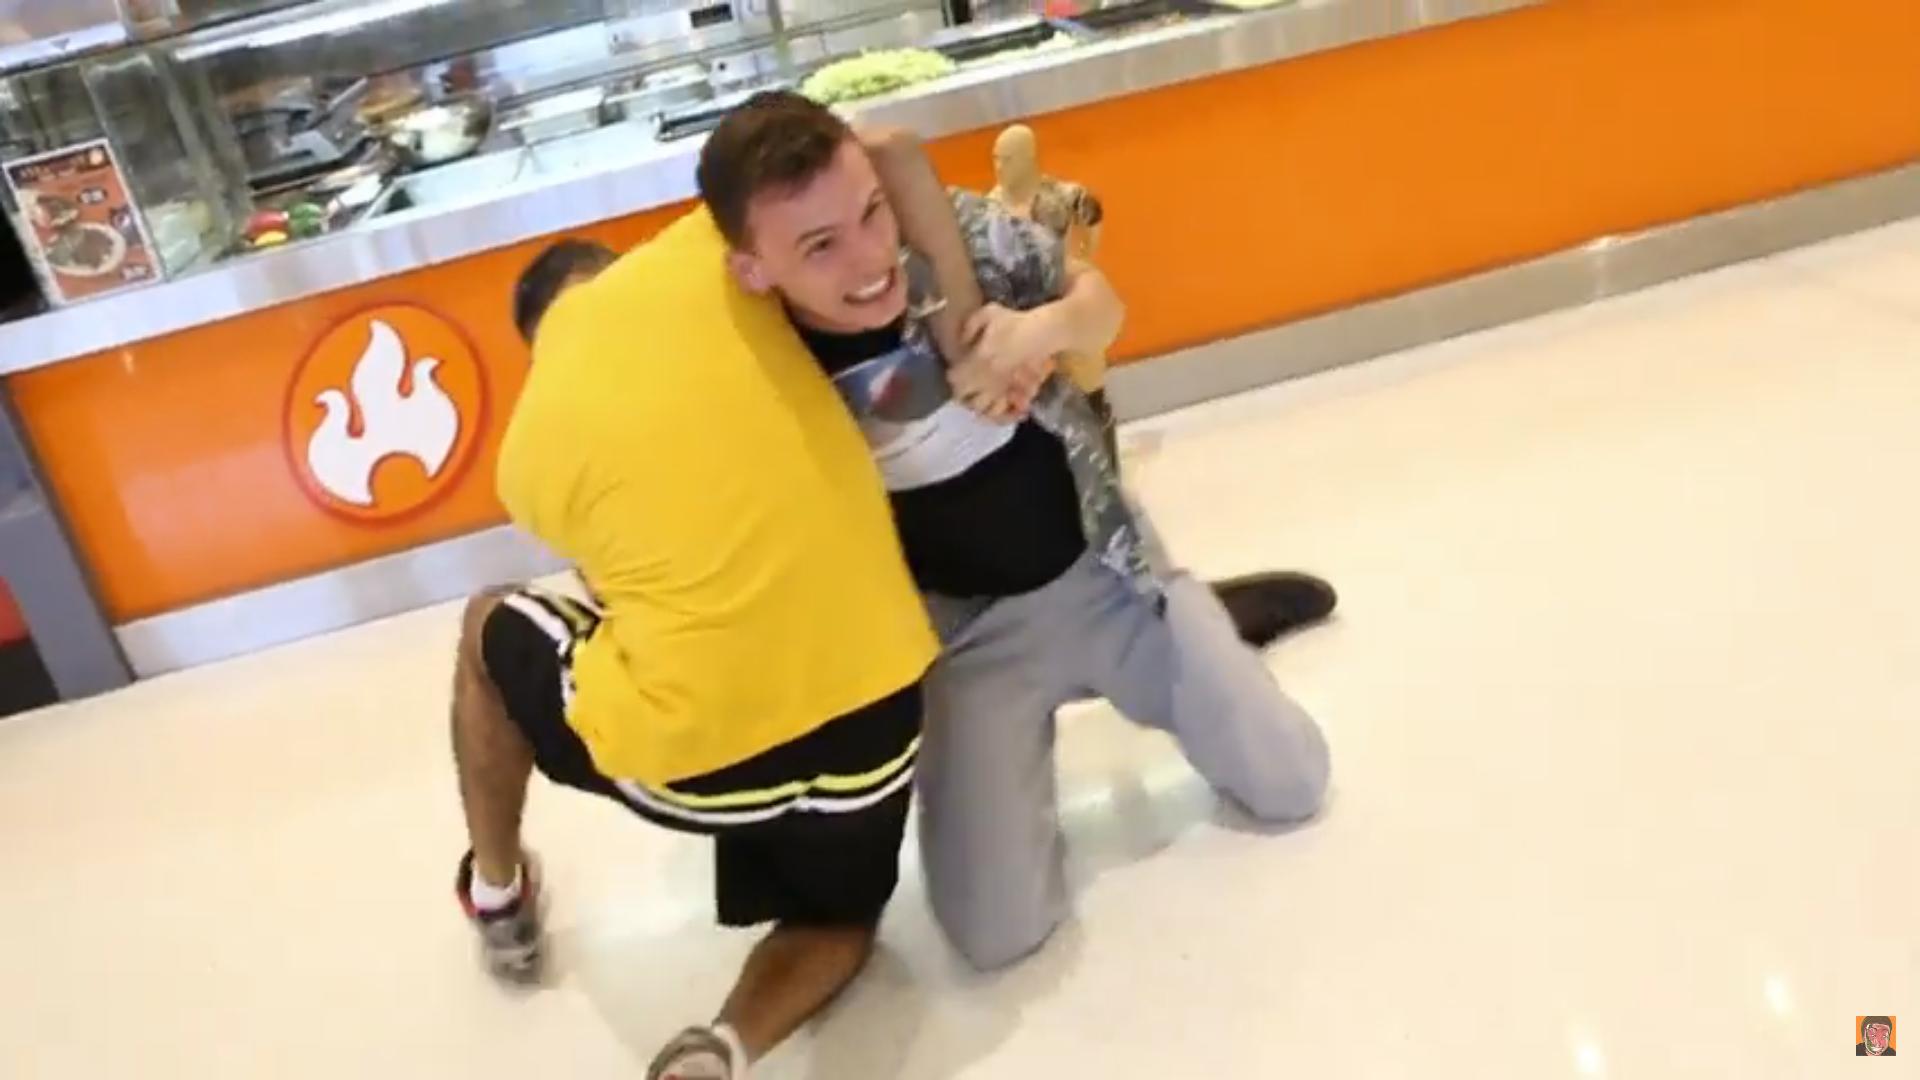 He Got a Free Kebab by Fighting With the Shop Owner